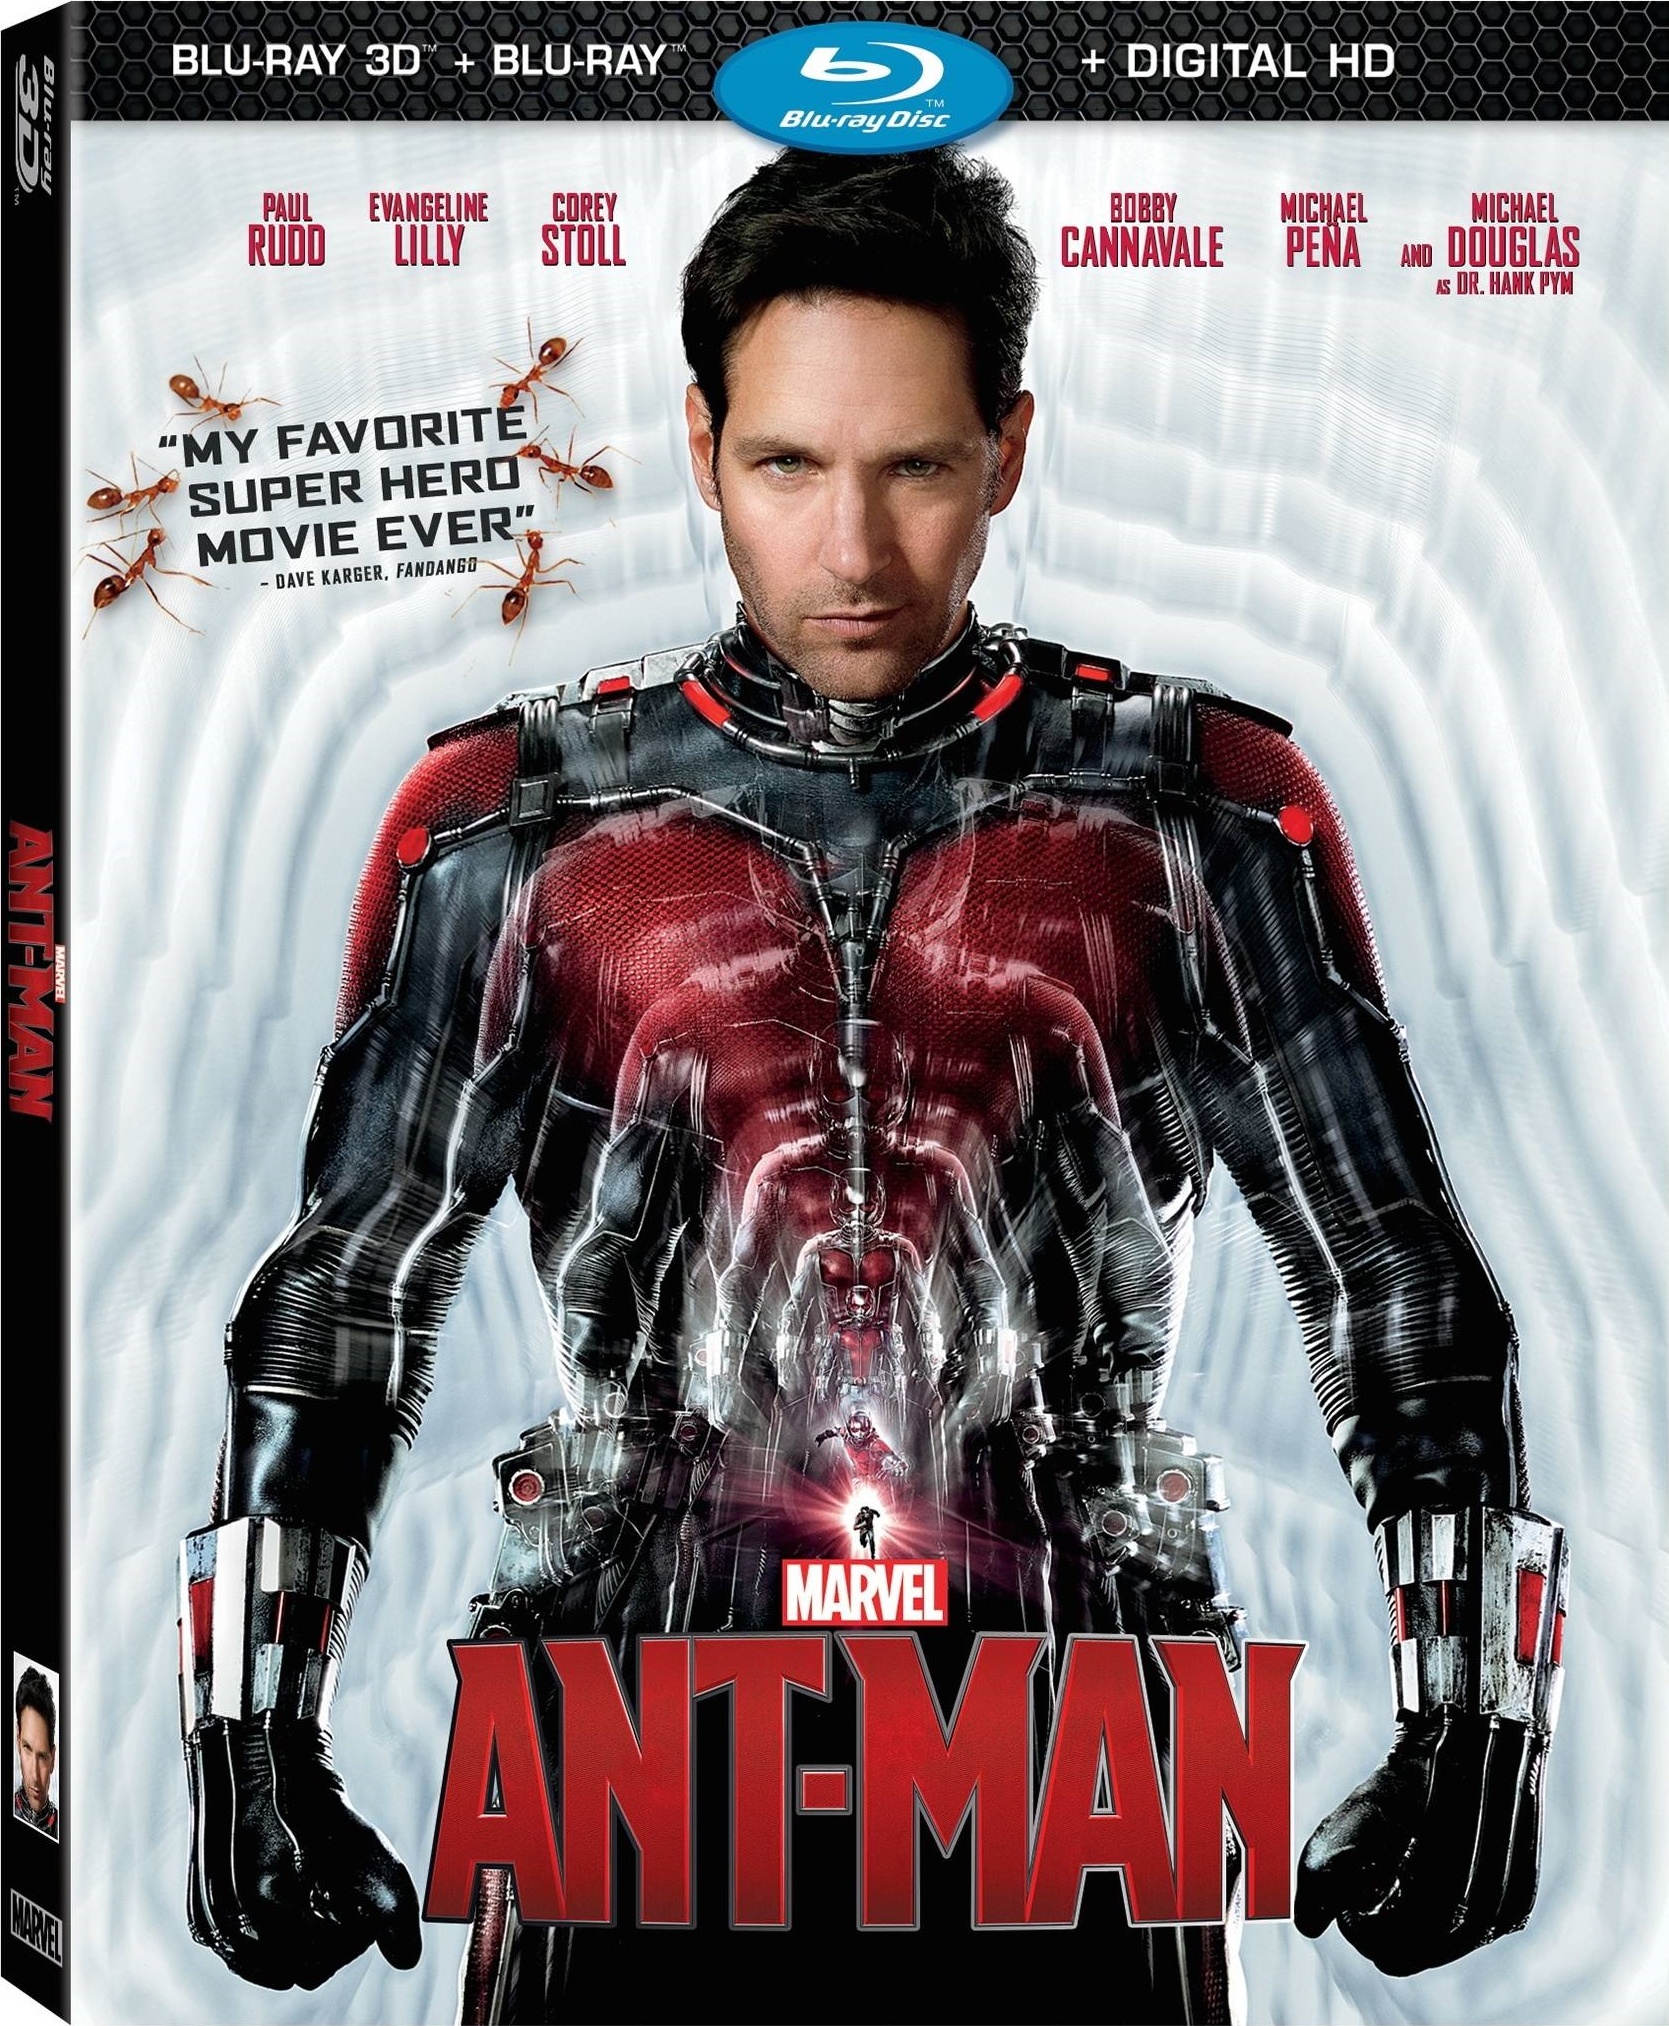 Ant-Man Blu-Ray 2D and 3D Review